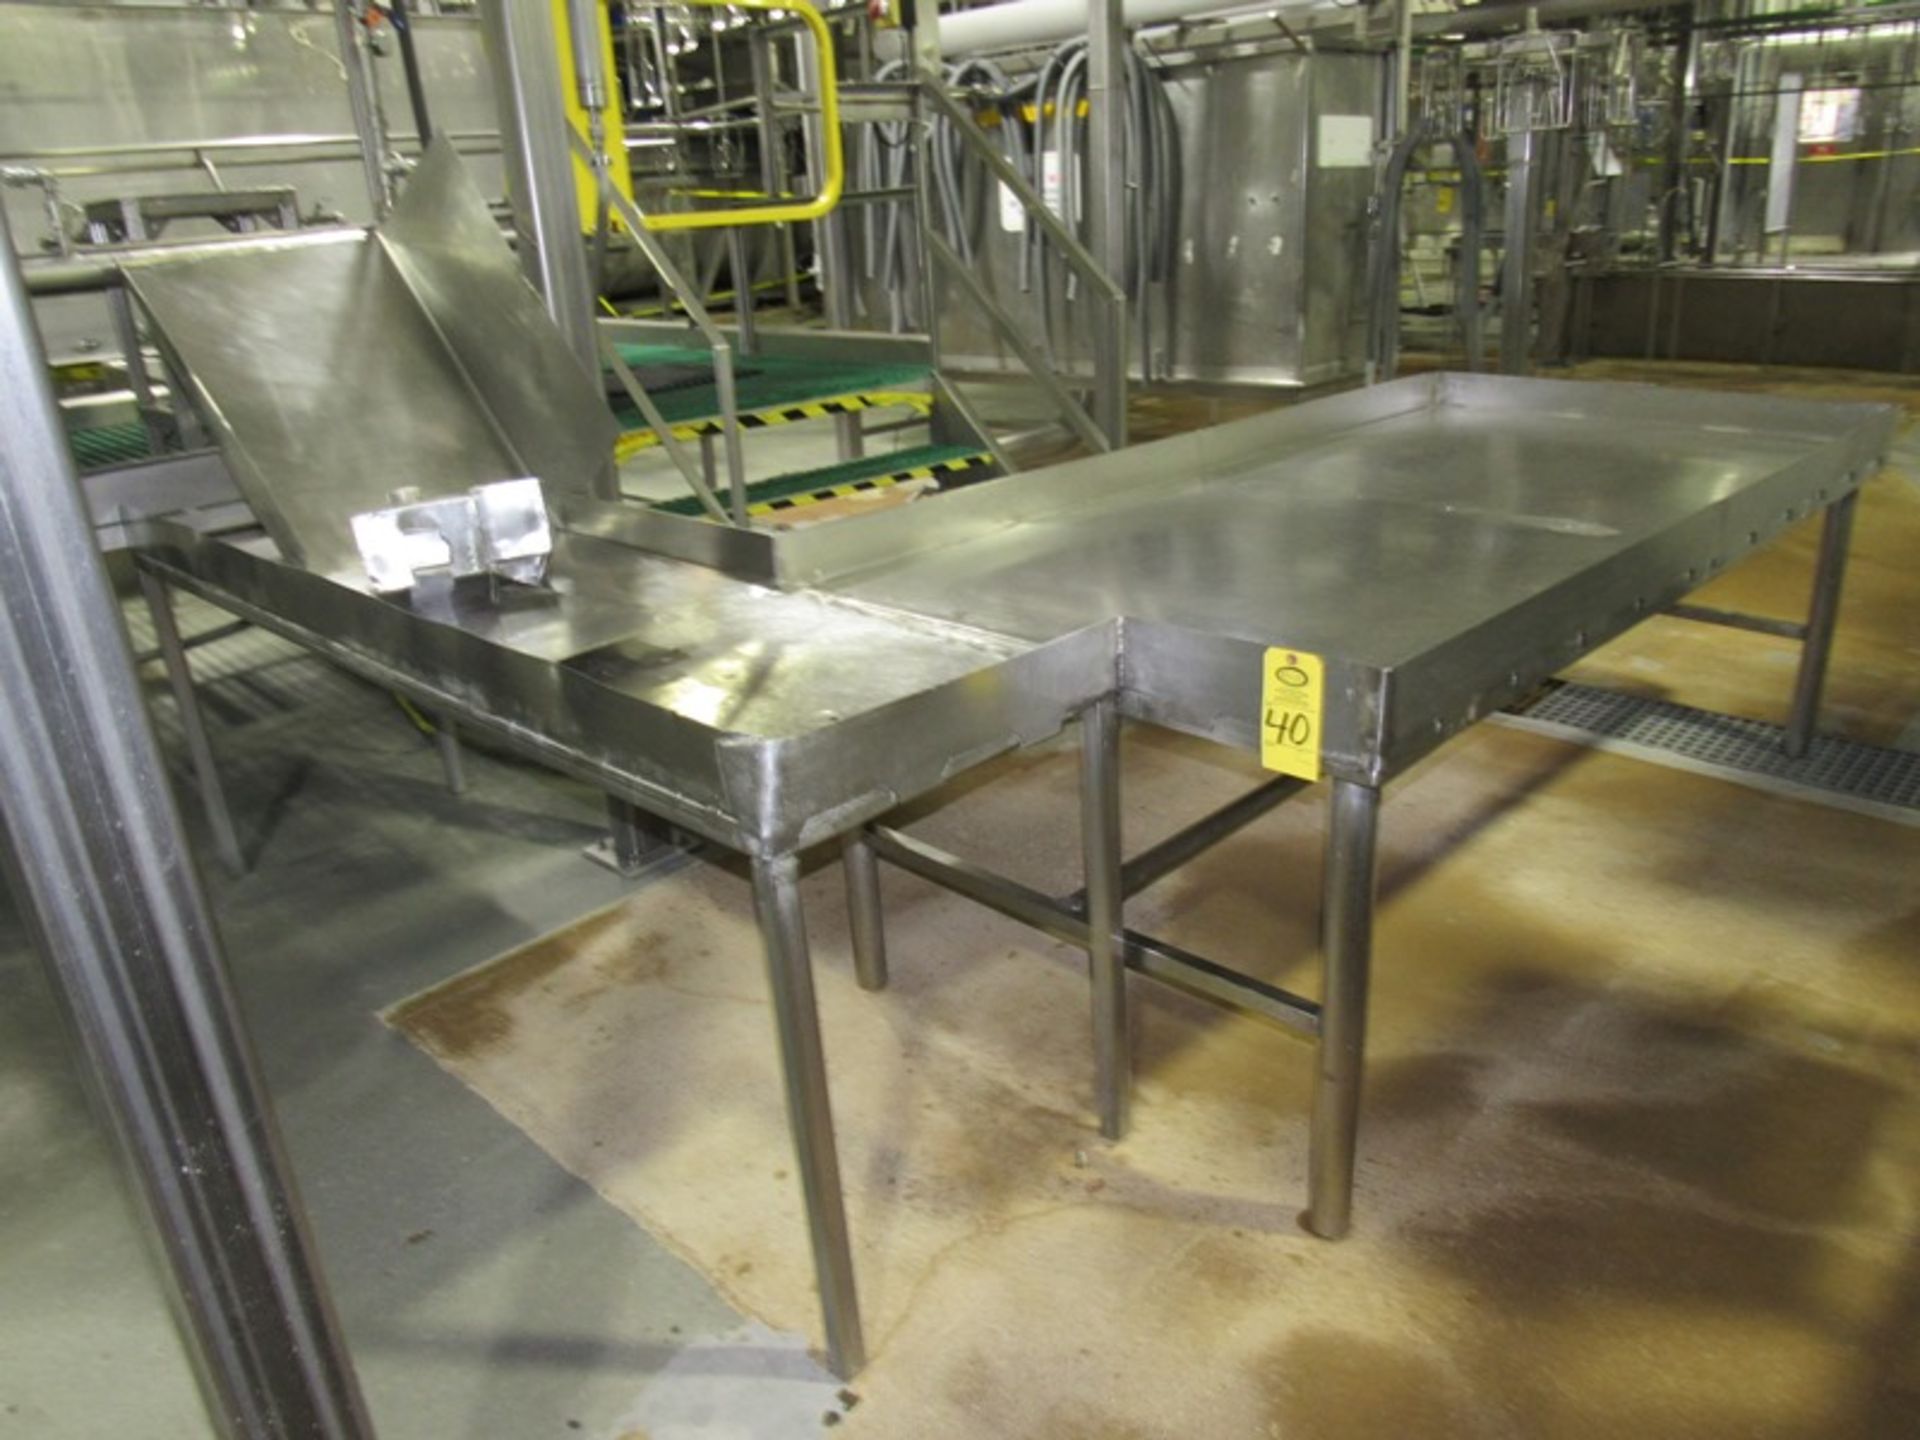 Stainless Steel Inspection Table, 45" W X 92" L with 24" W X 7' L weldment | Rig Fee: $75 - Image 2 of 2